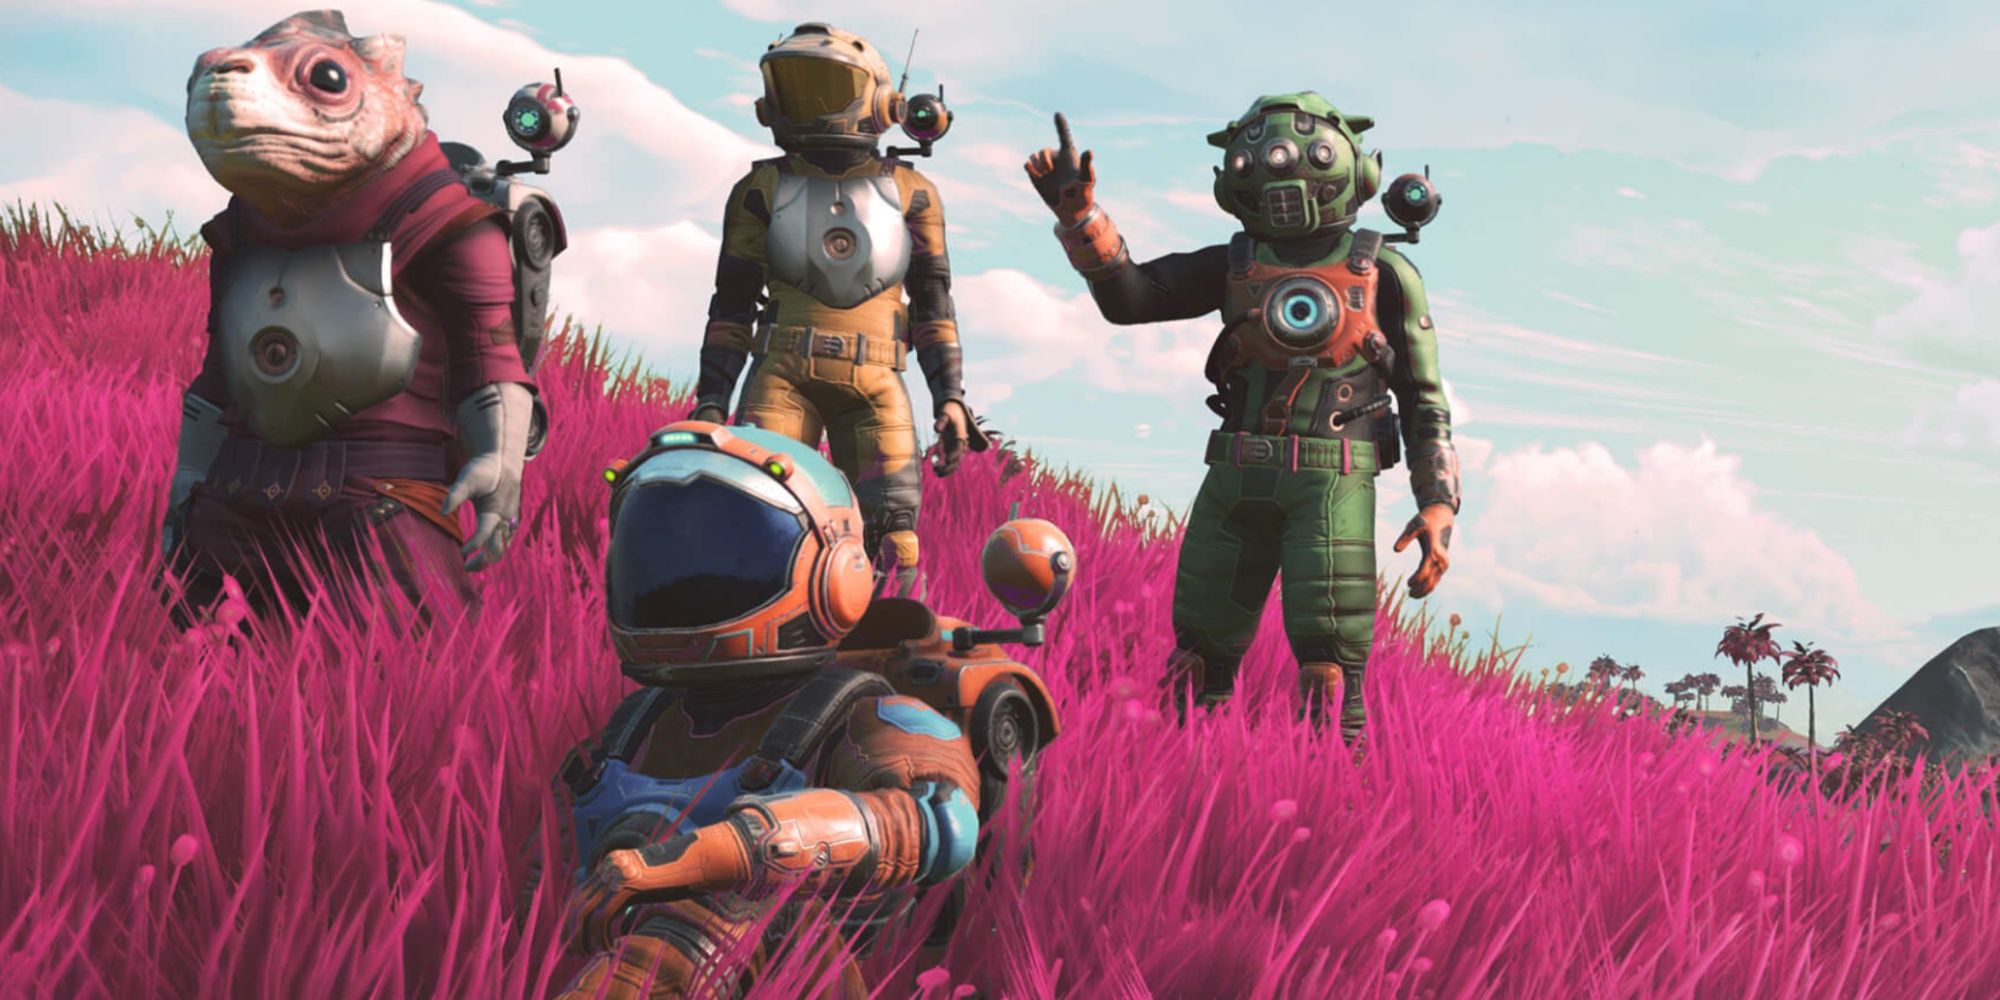 NEXT was one of the best expansions in No Man's Sky 